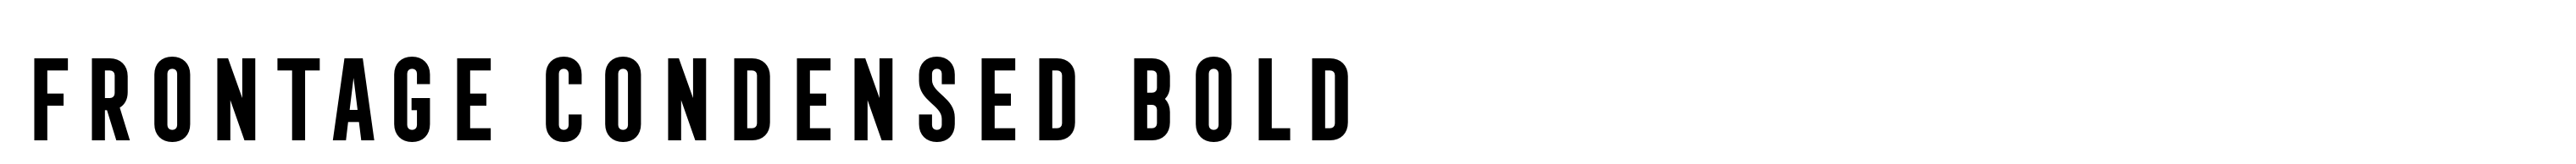 Frontage Condensed Bold